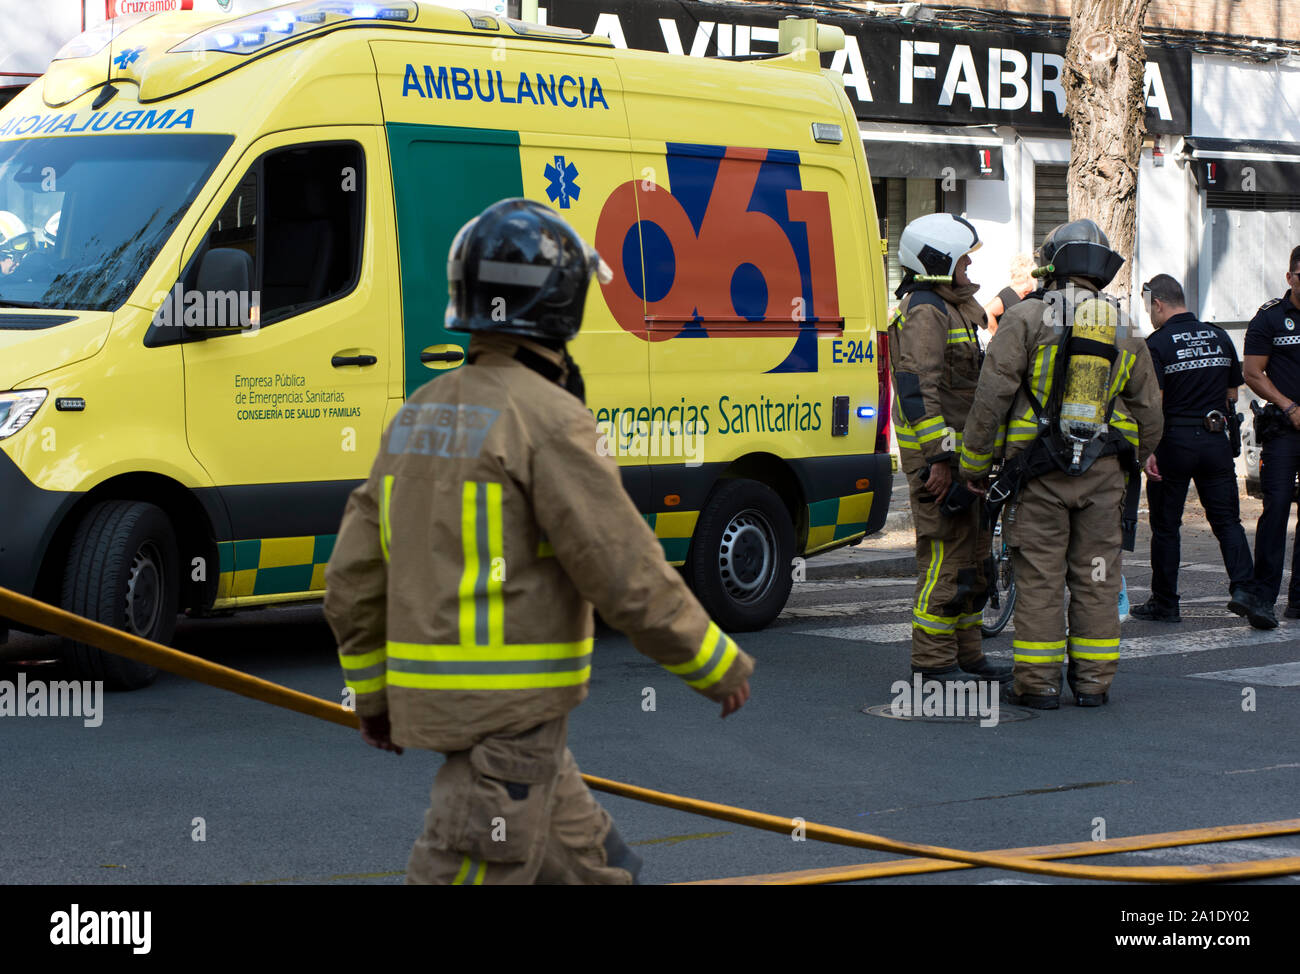 Spanish emergency services, firefighters, police and ambulances respond to an apartment fire in Seville, capital of Andalusia, Spain. Stock Photo